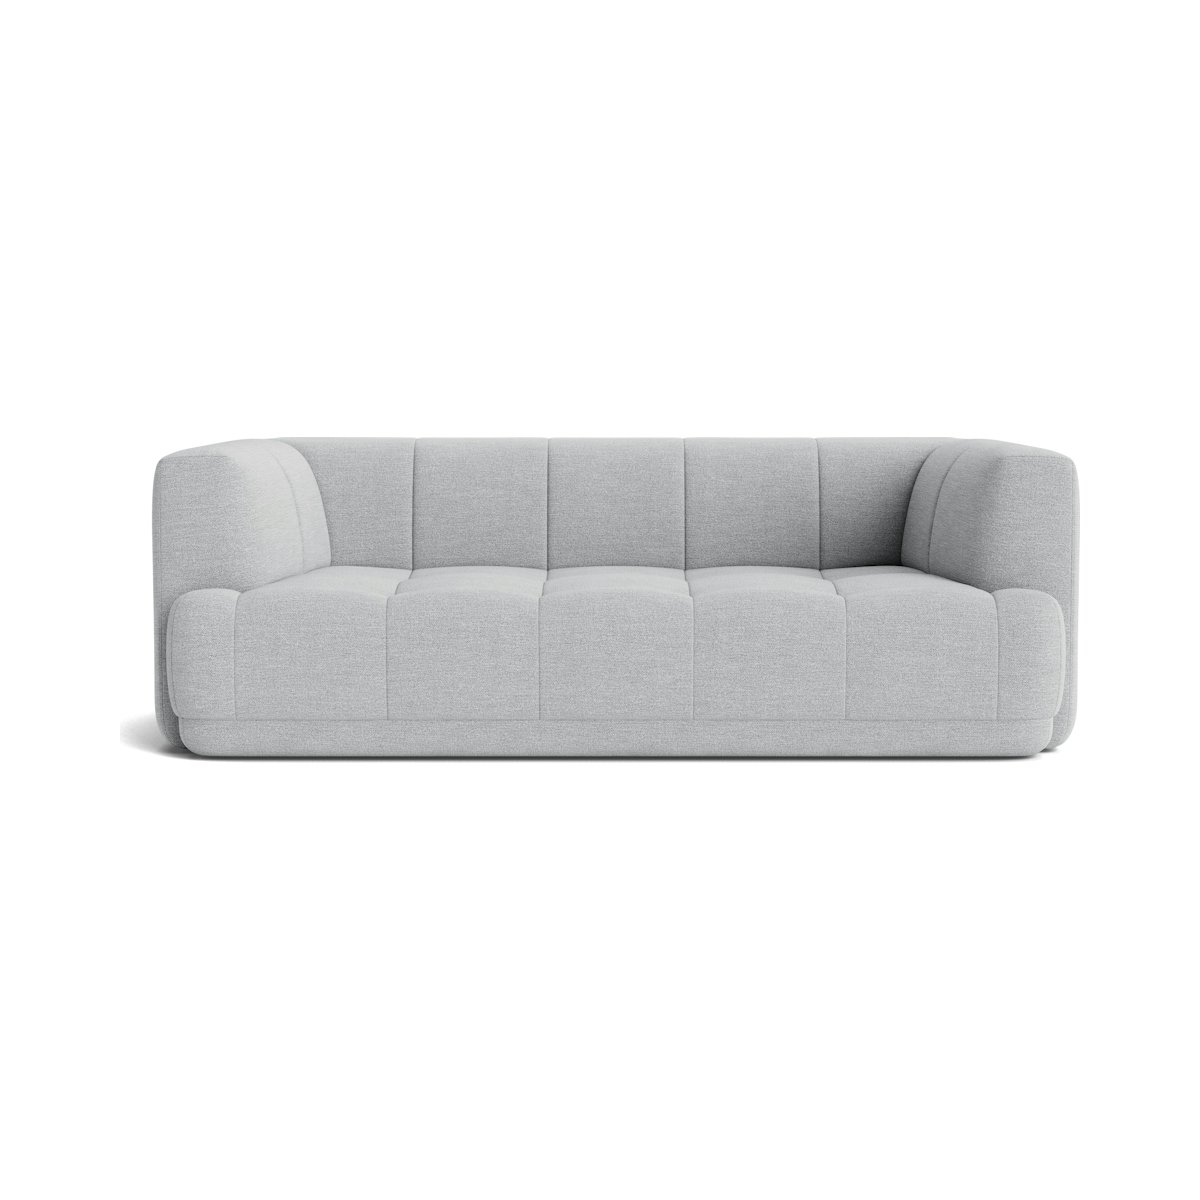 Quilton Two Seater Sofa